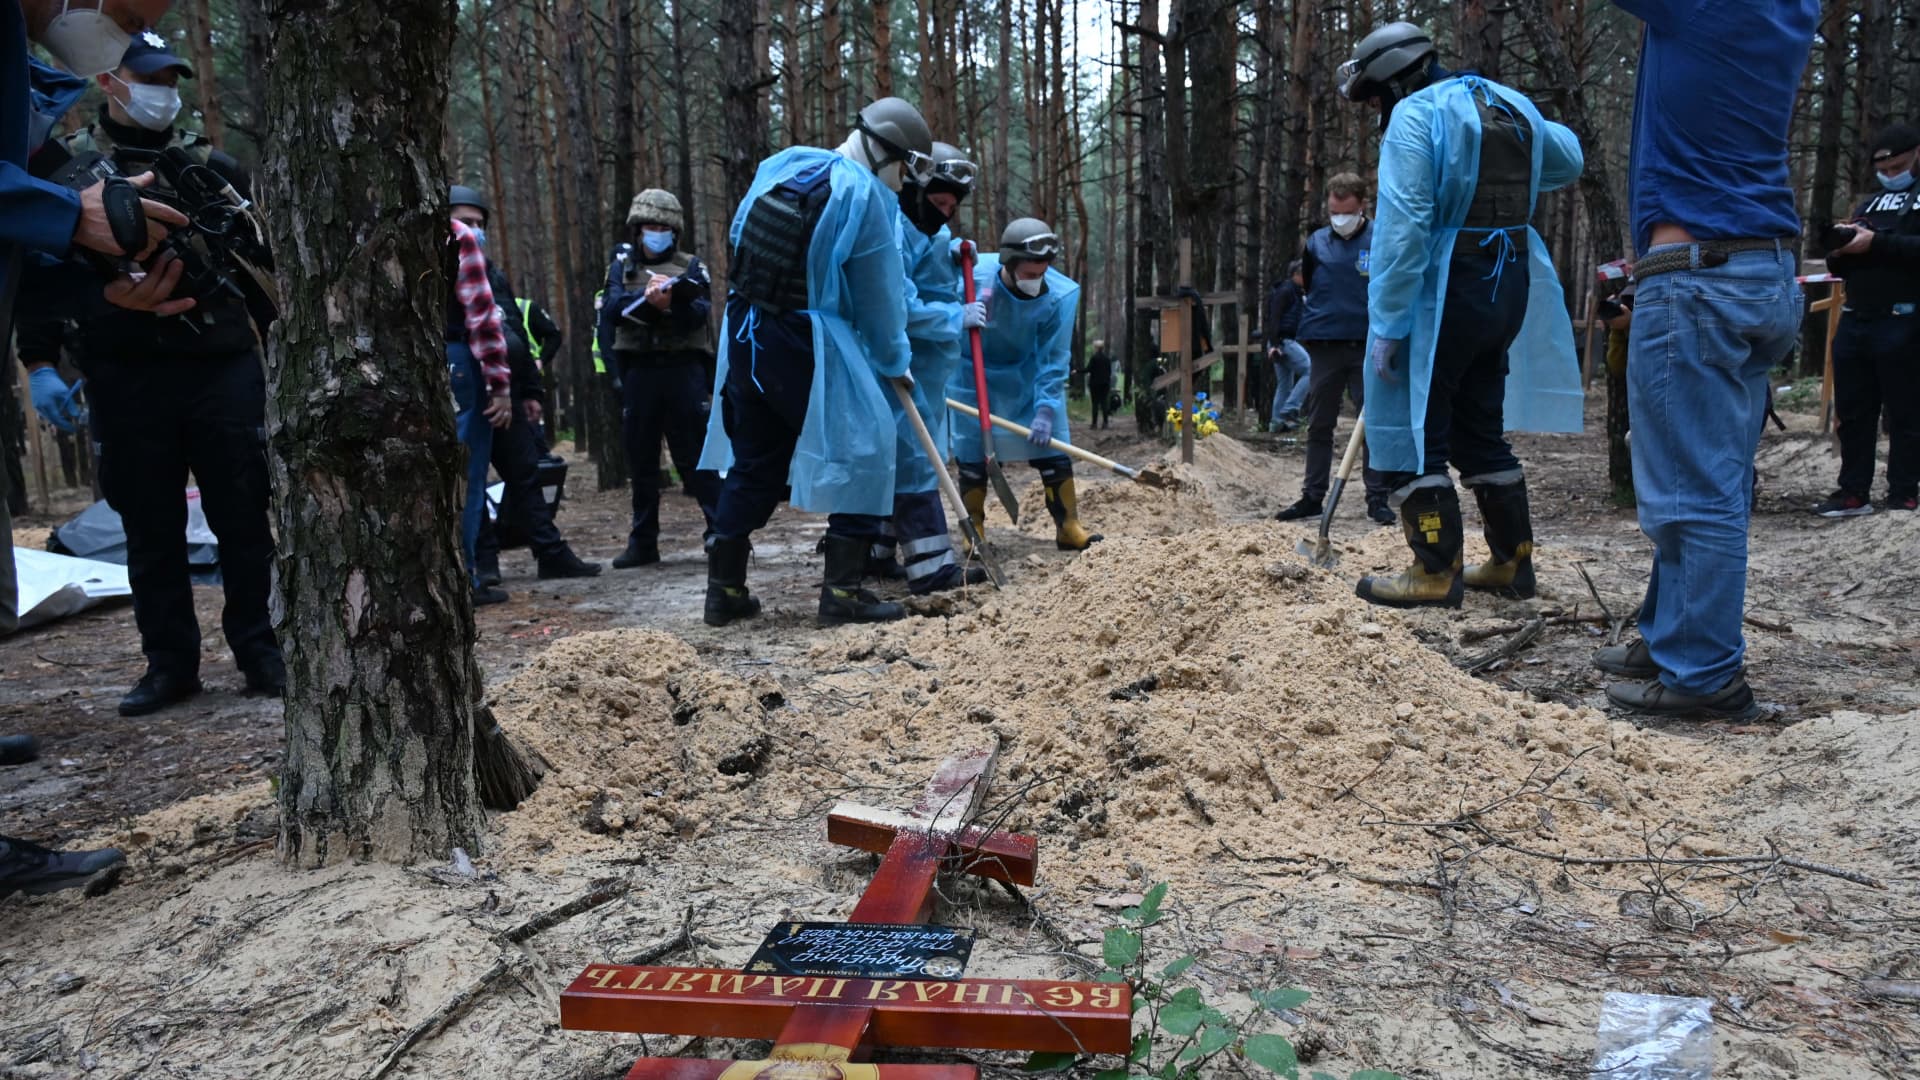 Forensic technicians dig a grave in a forest on the outskirts of Izyum, eastern Ukraine on September 16, 2022. - Ukraine said on September 16, 2022 it had counted 450 graves at just one burial site near Izyum after recapturing the eastern city from the Russians. 